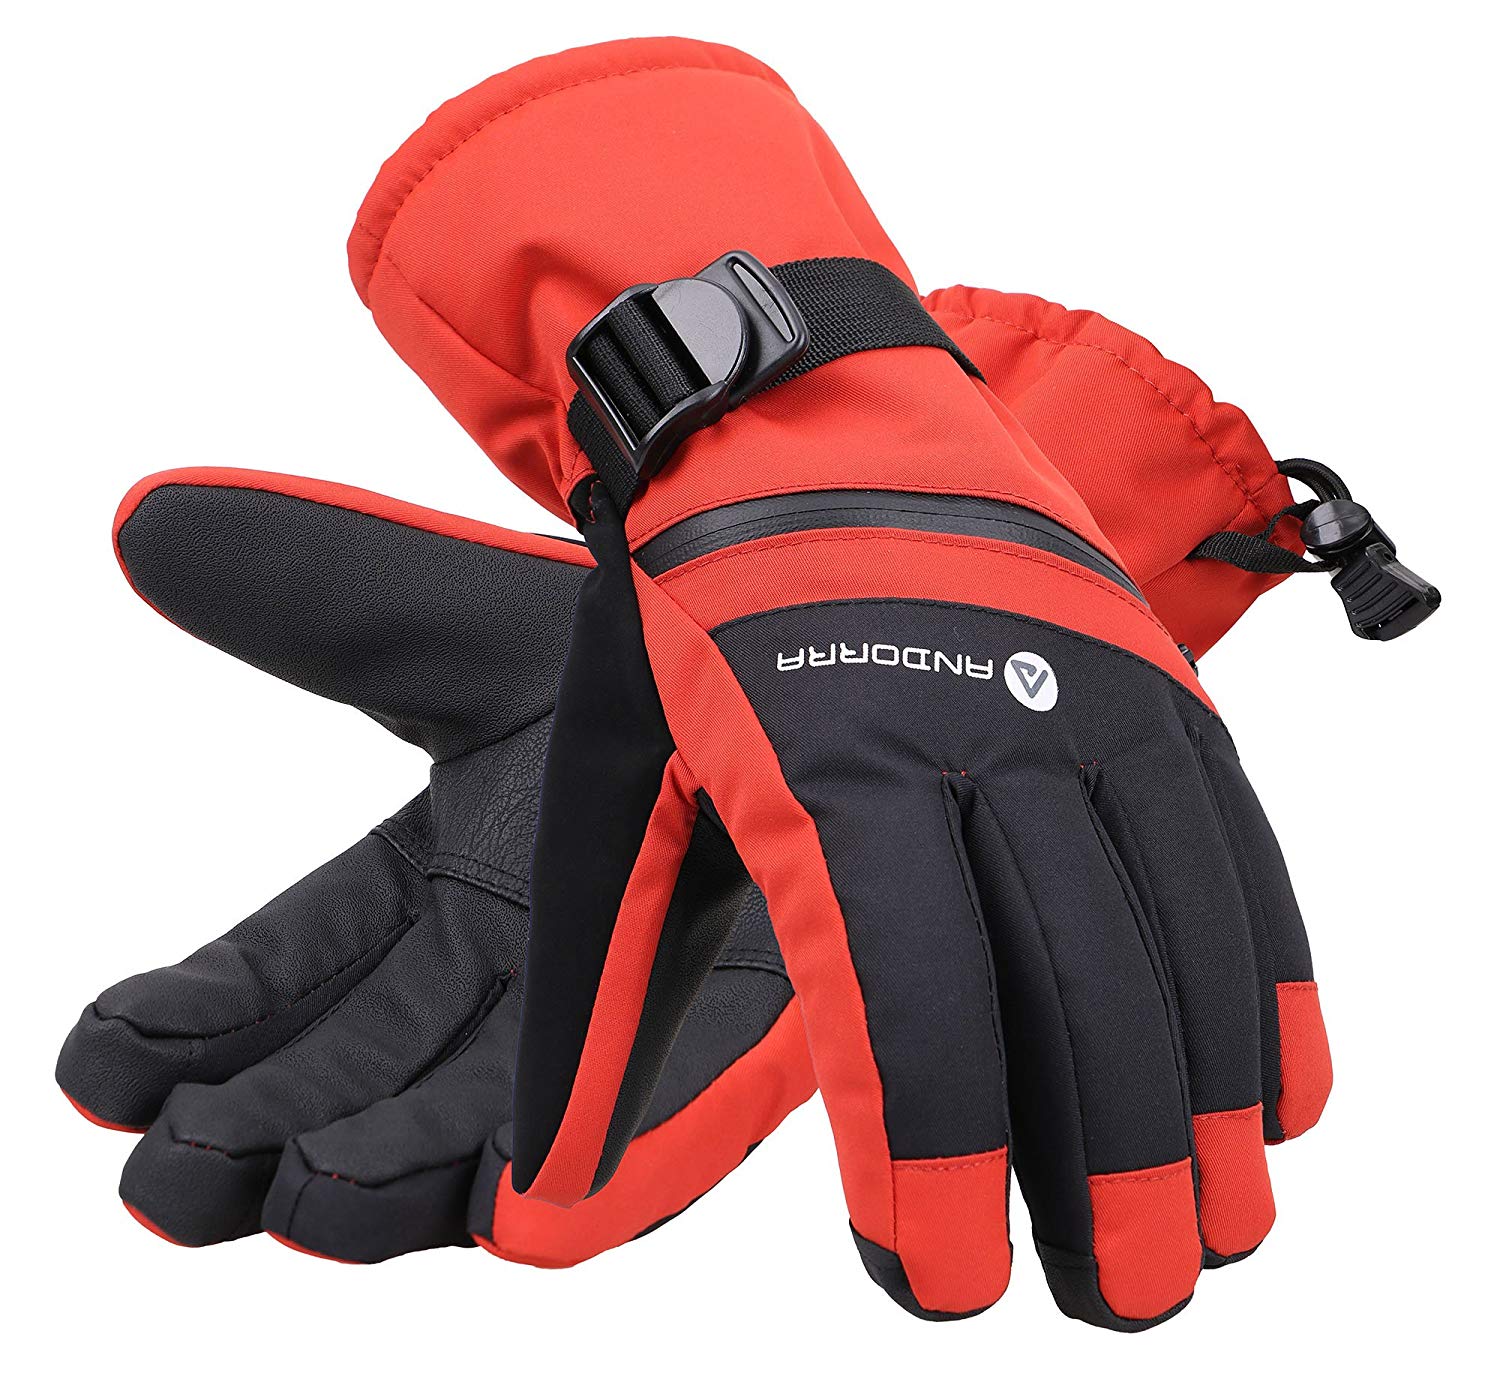 Touchscreen gloves for skiing